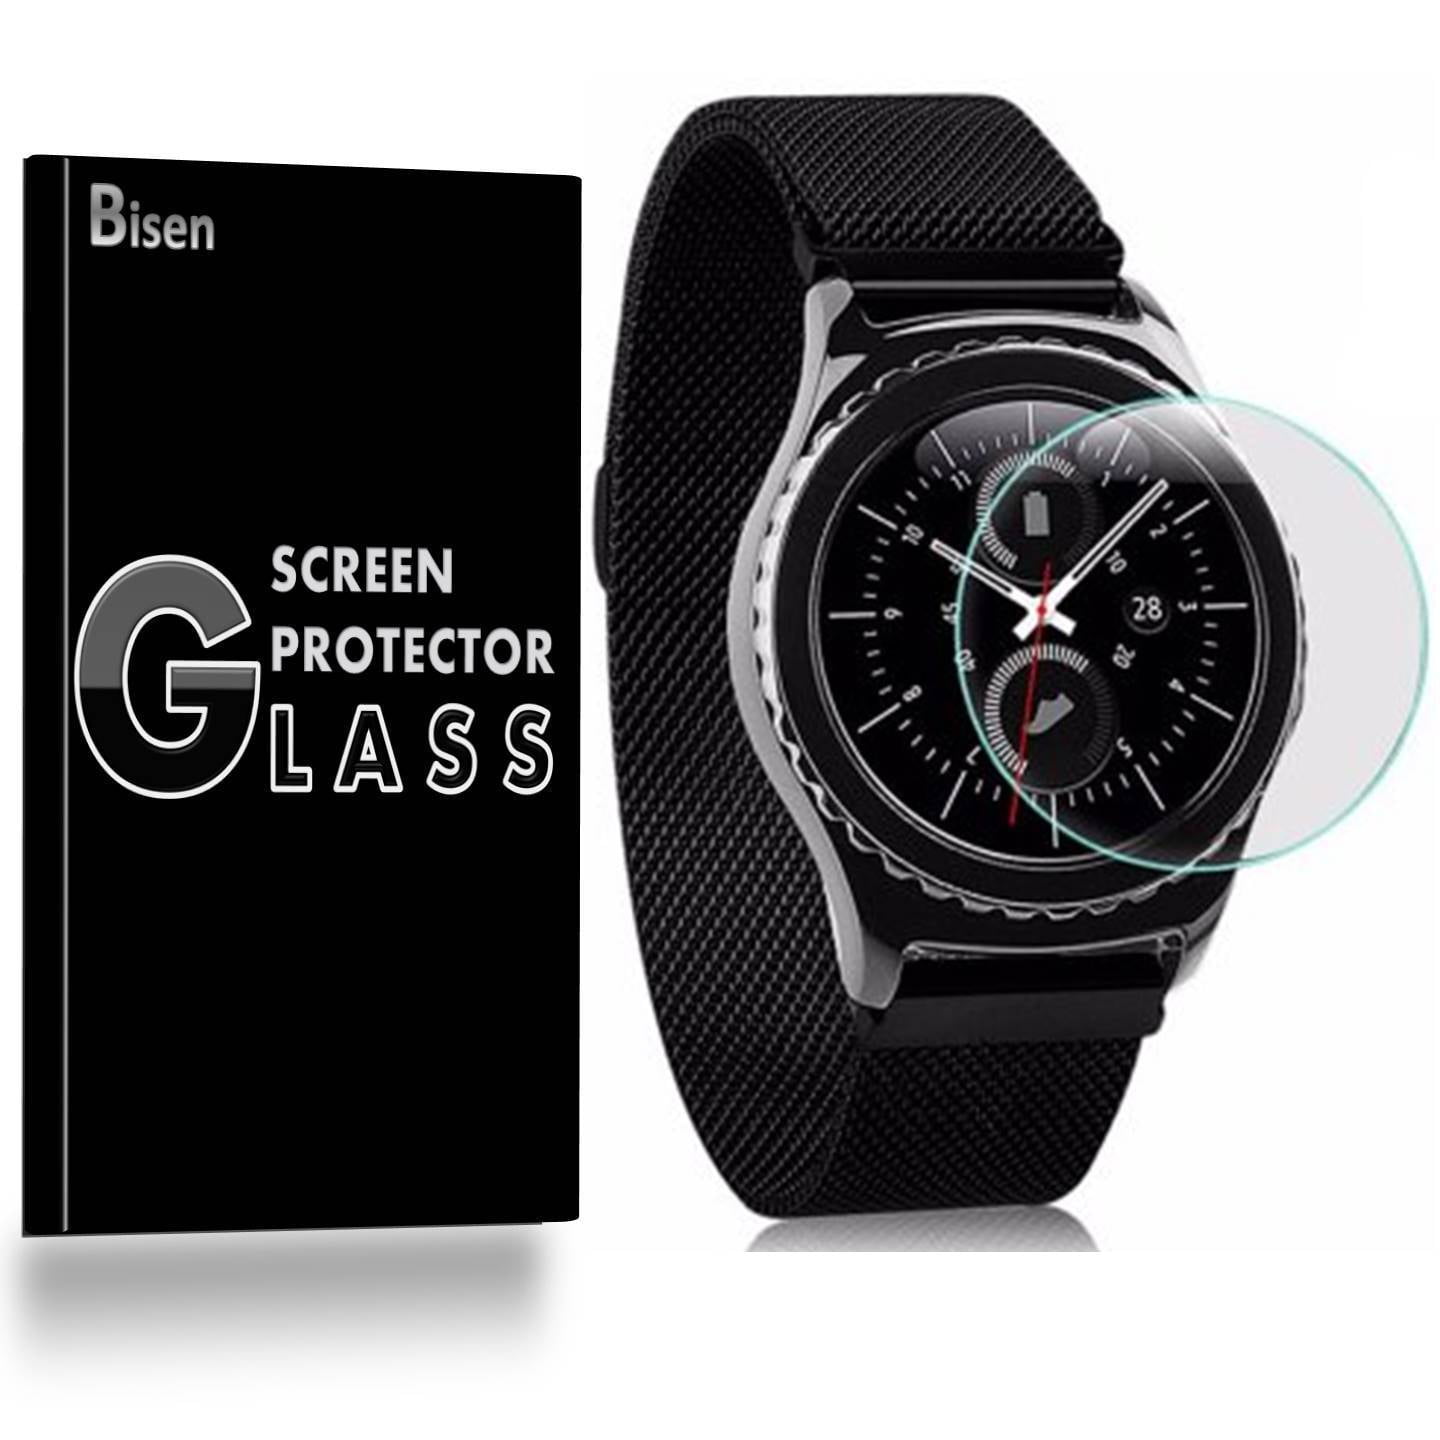 AT&T, T-Mobile, 4G DeltaShield Full Body Skin for Samsung Gear S2 52mm Screen Protector Included 2-Pack Front and Back Protector BodyArmor Non-Bubble Military-Grade Clear HD Film 